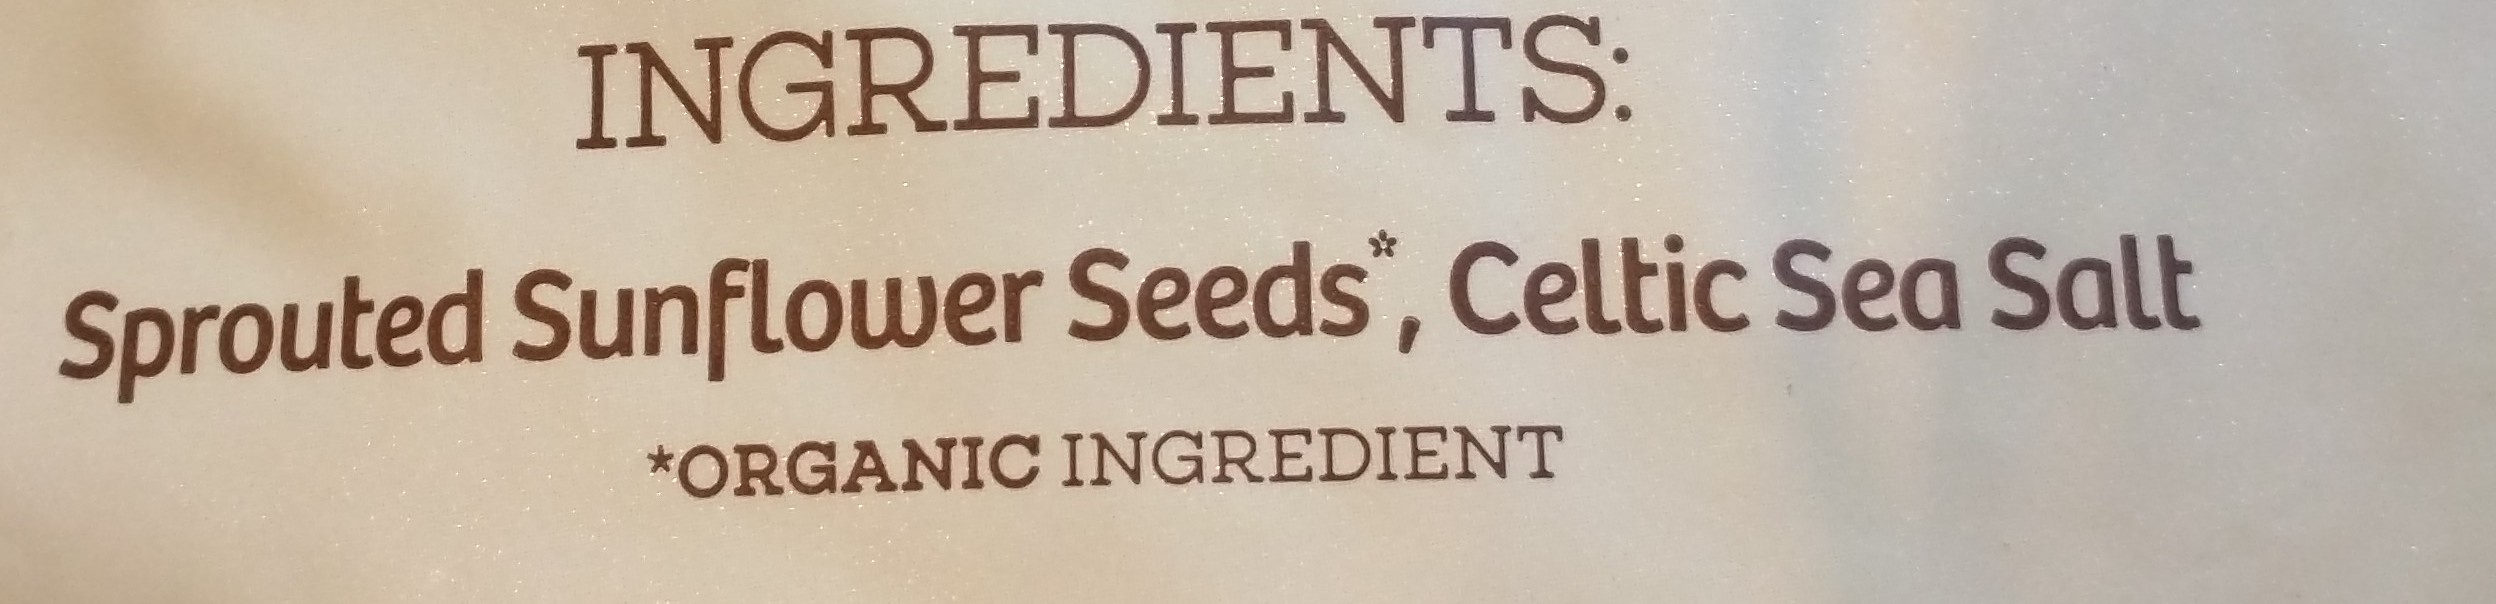 Go raw, sprouted sunflower seeds with celtic sea salt - Ingredients